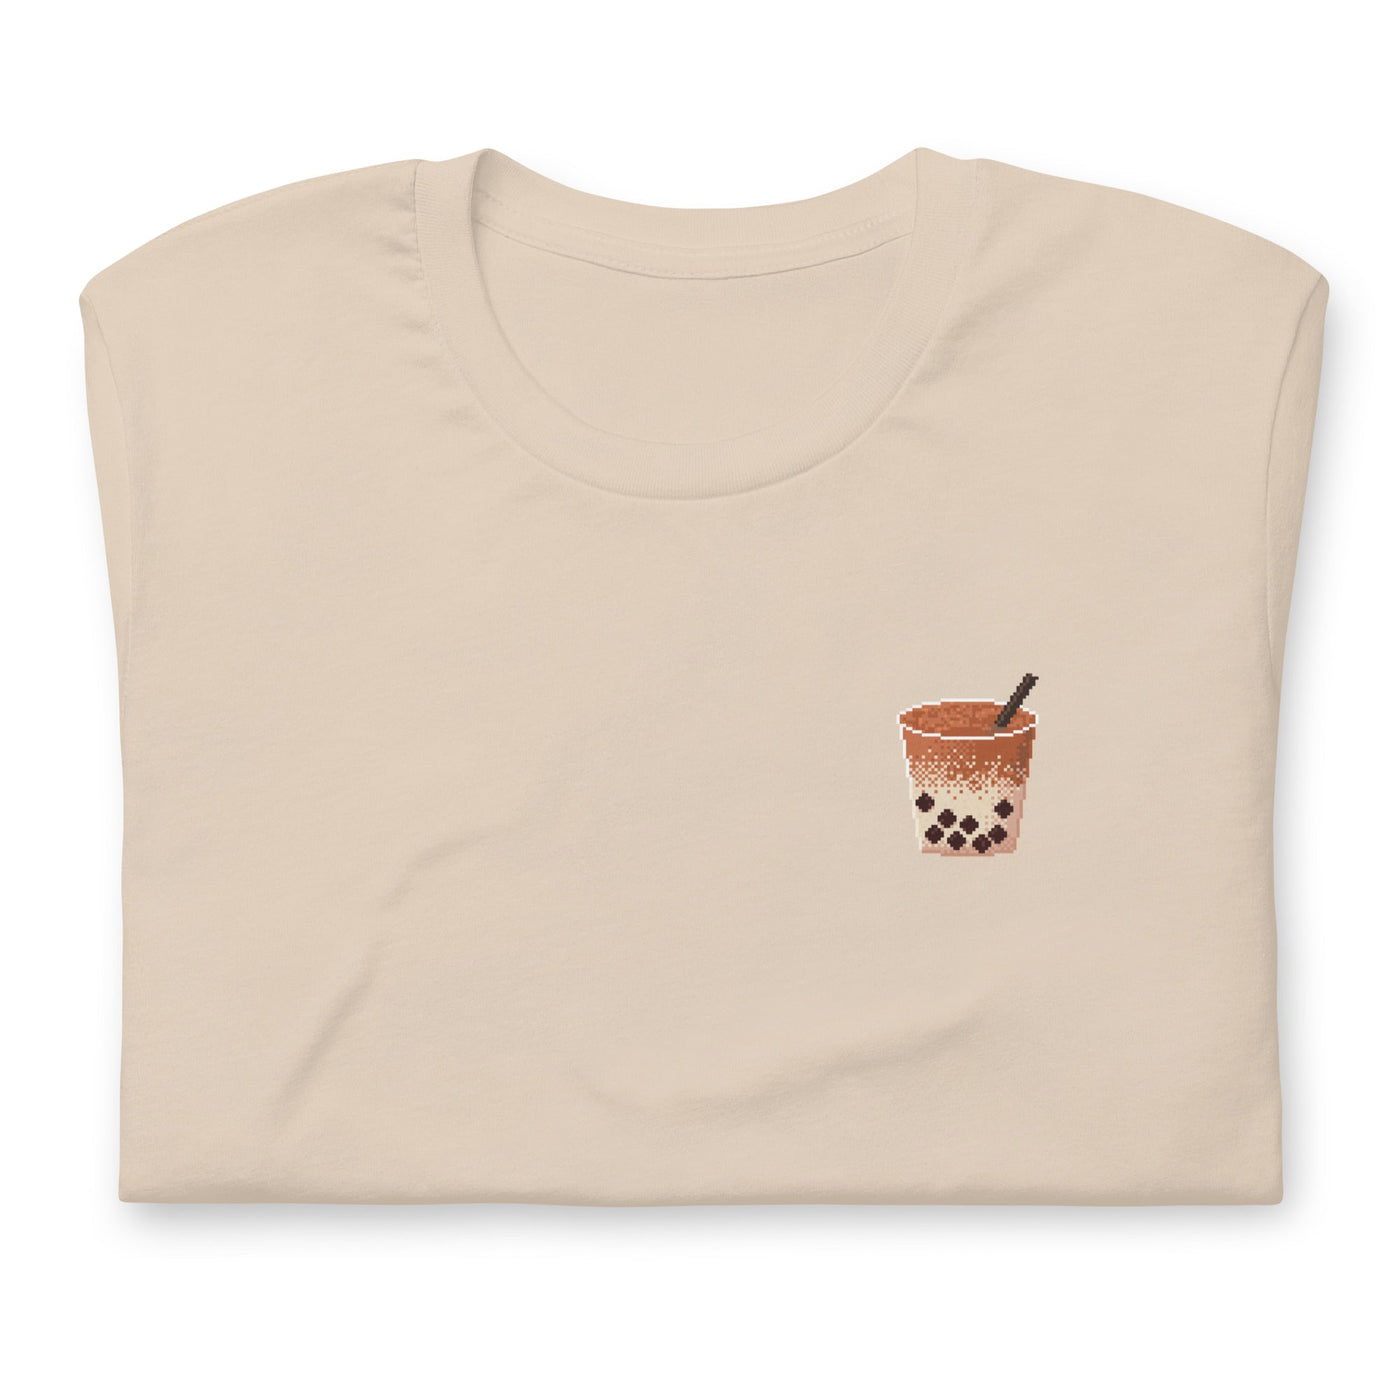 Pixel Boba | Unisex t-shirt | Cozy Gamer Threads and Thistles Inventory Soft Cream XS 